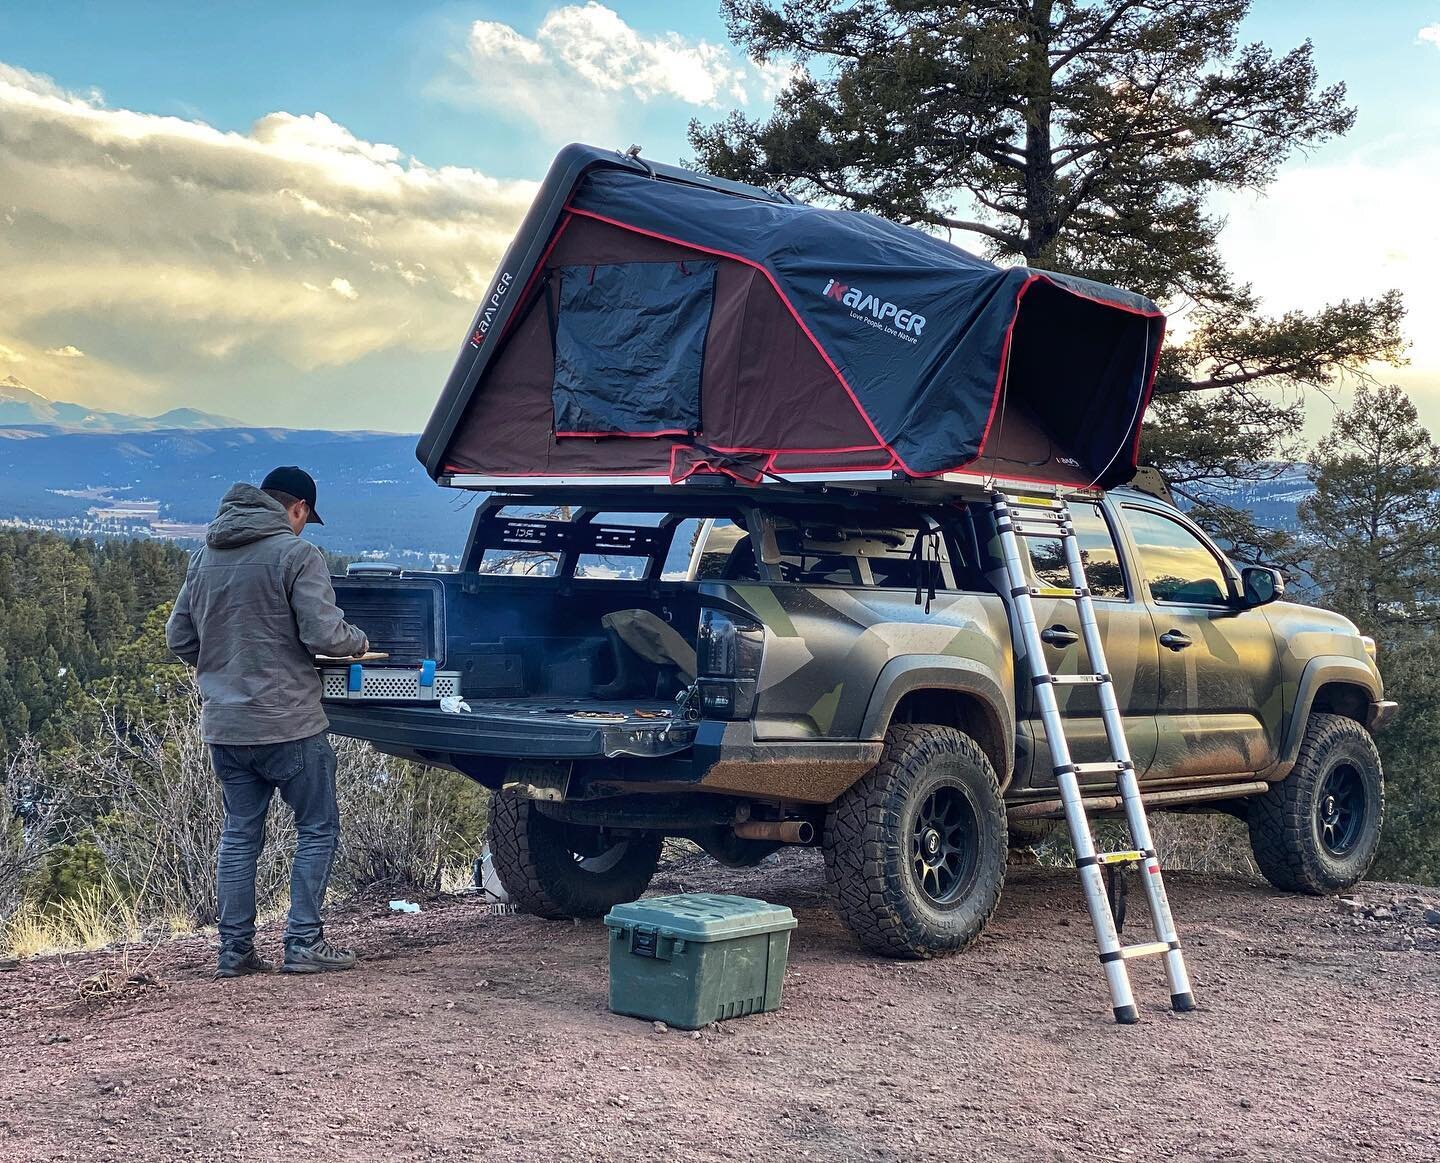 Packing up for a few nights of camping down near Ca&ntilde;on city. Feeling good now that we finally have the Tundra build underway. Might be time for some major changes to the ole Tacoma soon too 😬.
.
.
.
.
.
.
.
.
.
.
#nomadgrills #ikamper #toyota